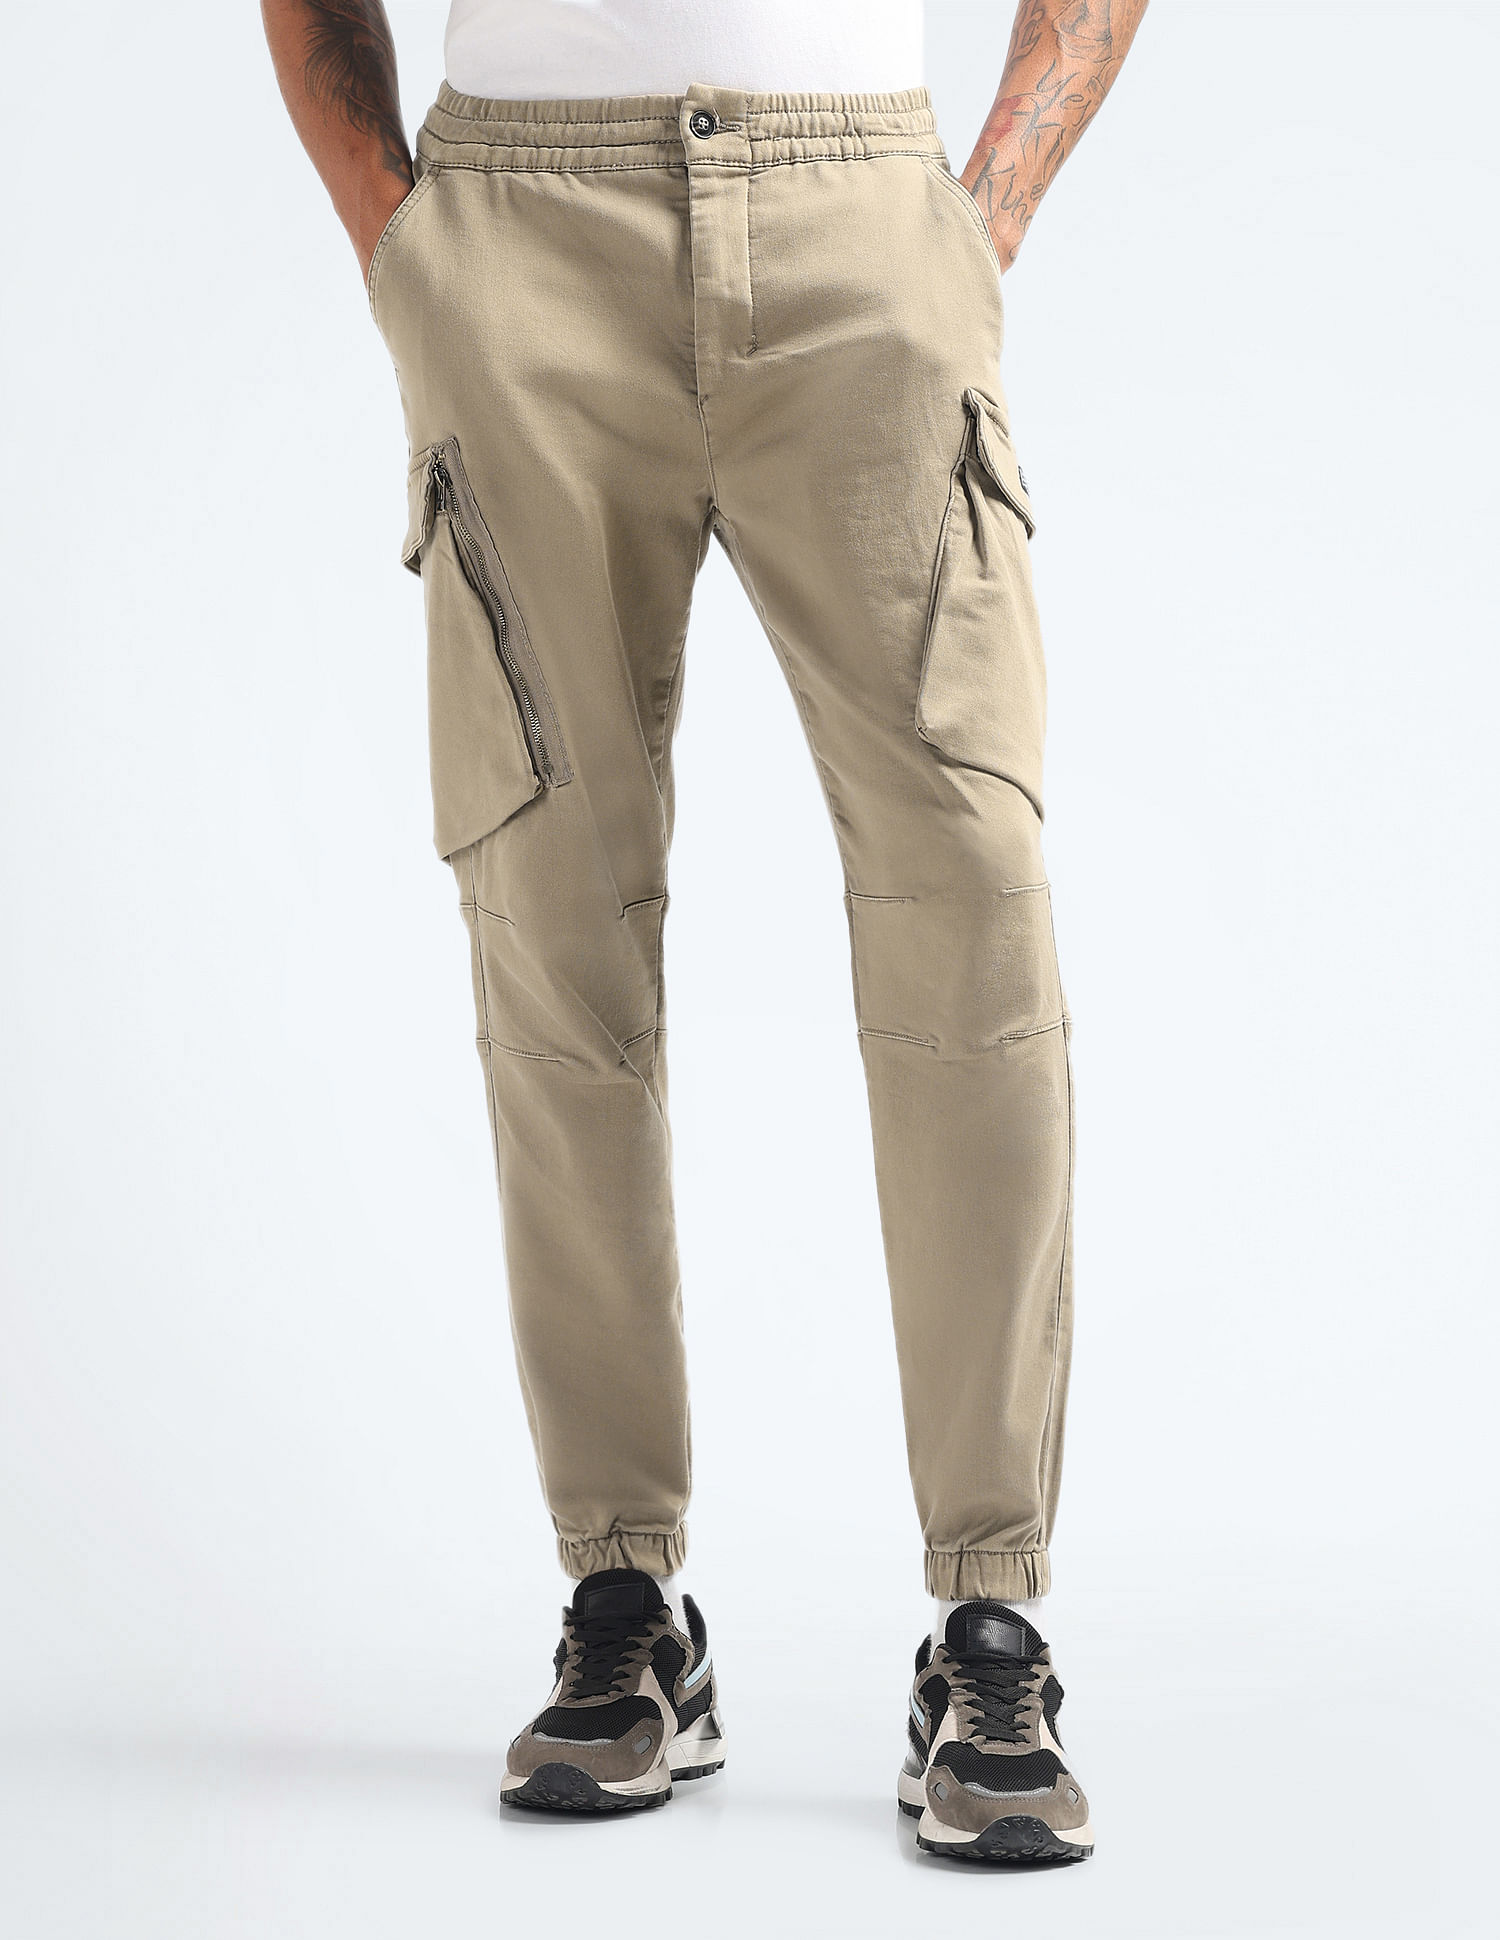 Men Relaxed Fit Trousers - Buy Men Relaxed Fit Trousers online in India